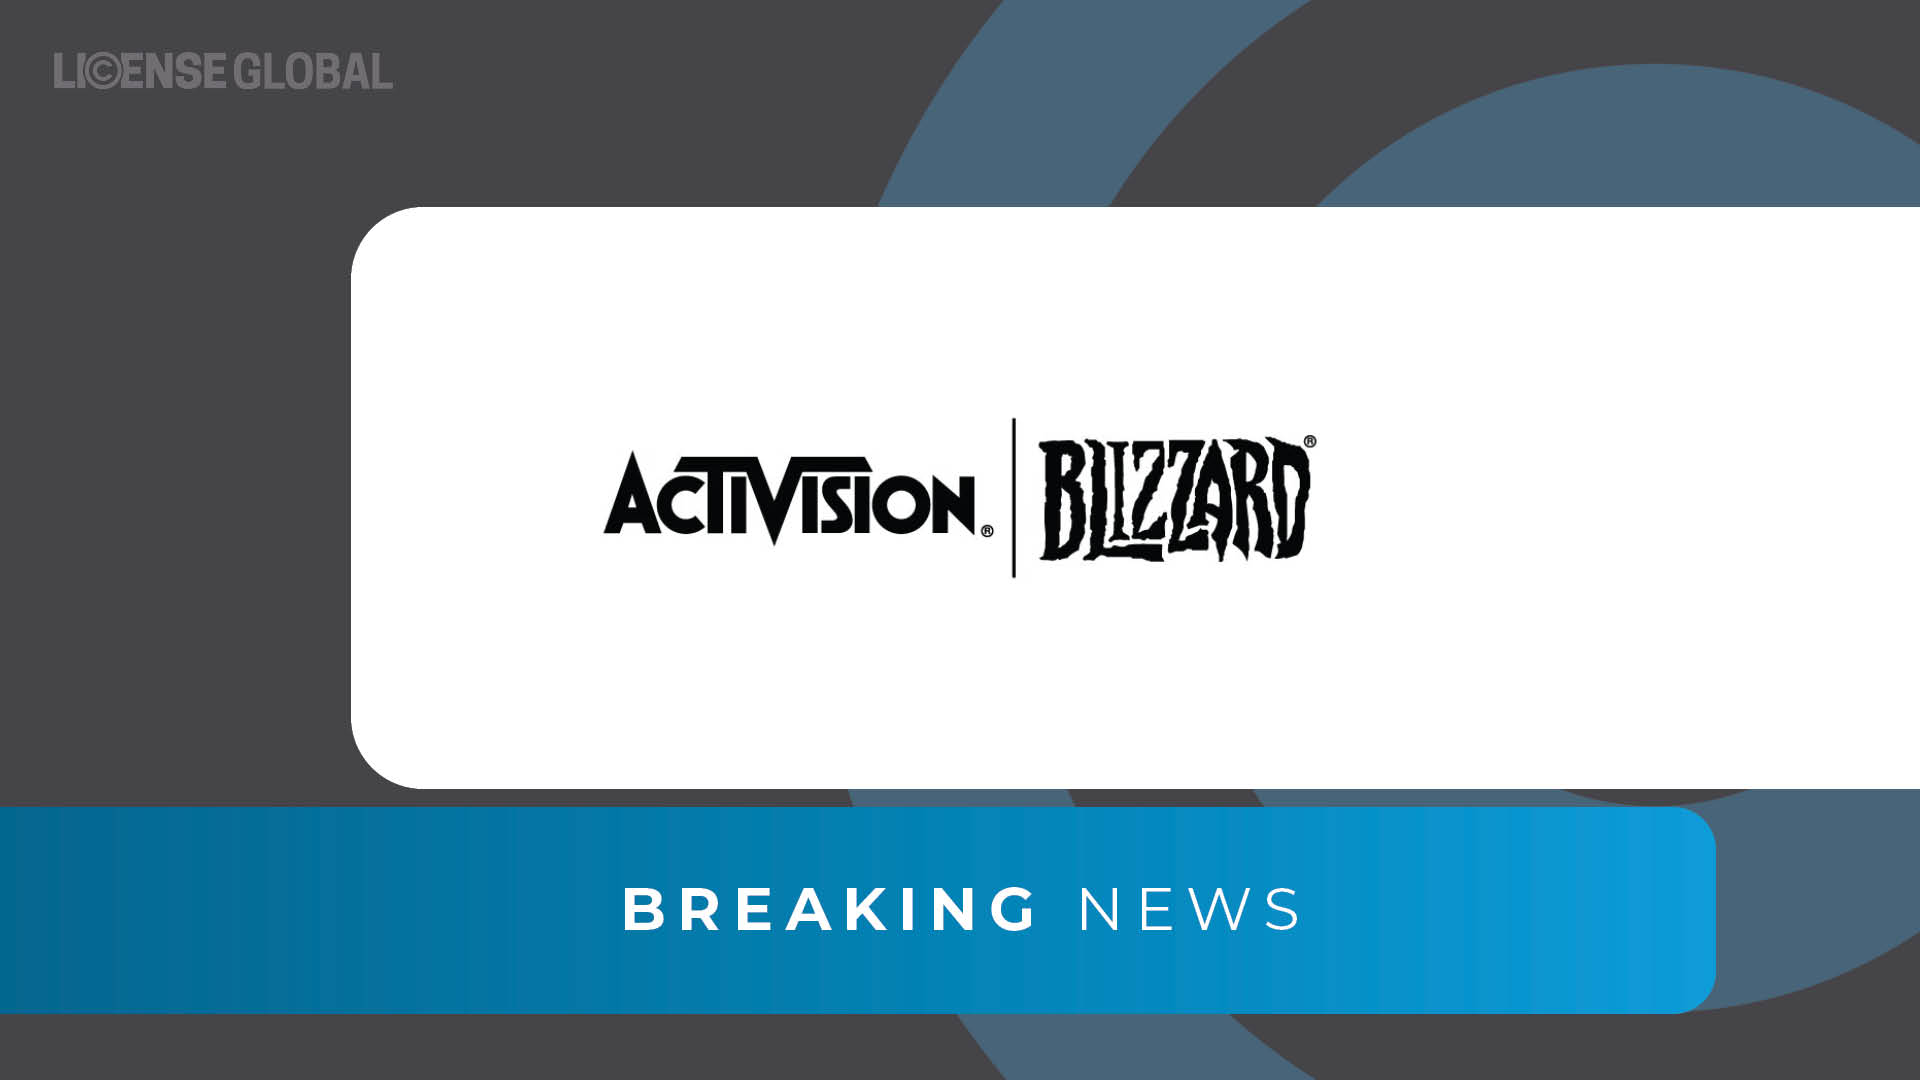 Updated] Microsoft Restructures Planned Activision-Blizzard Deal